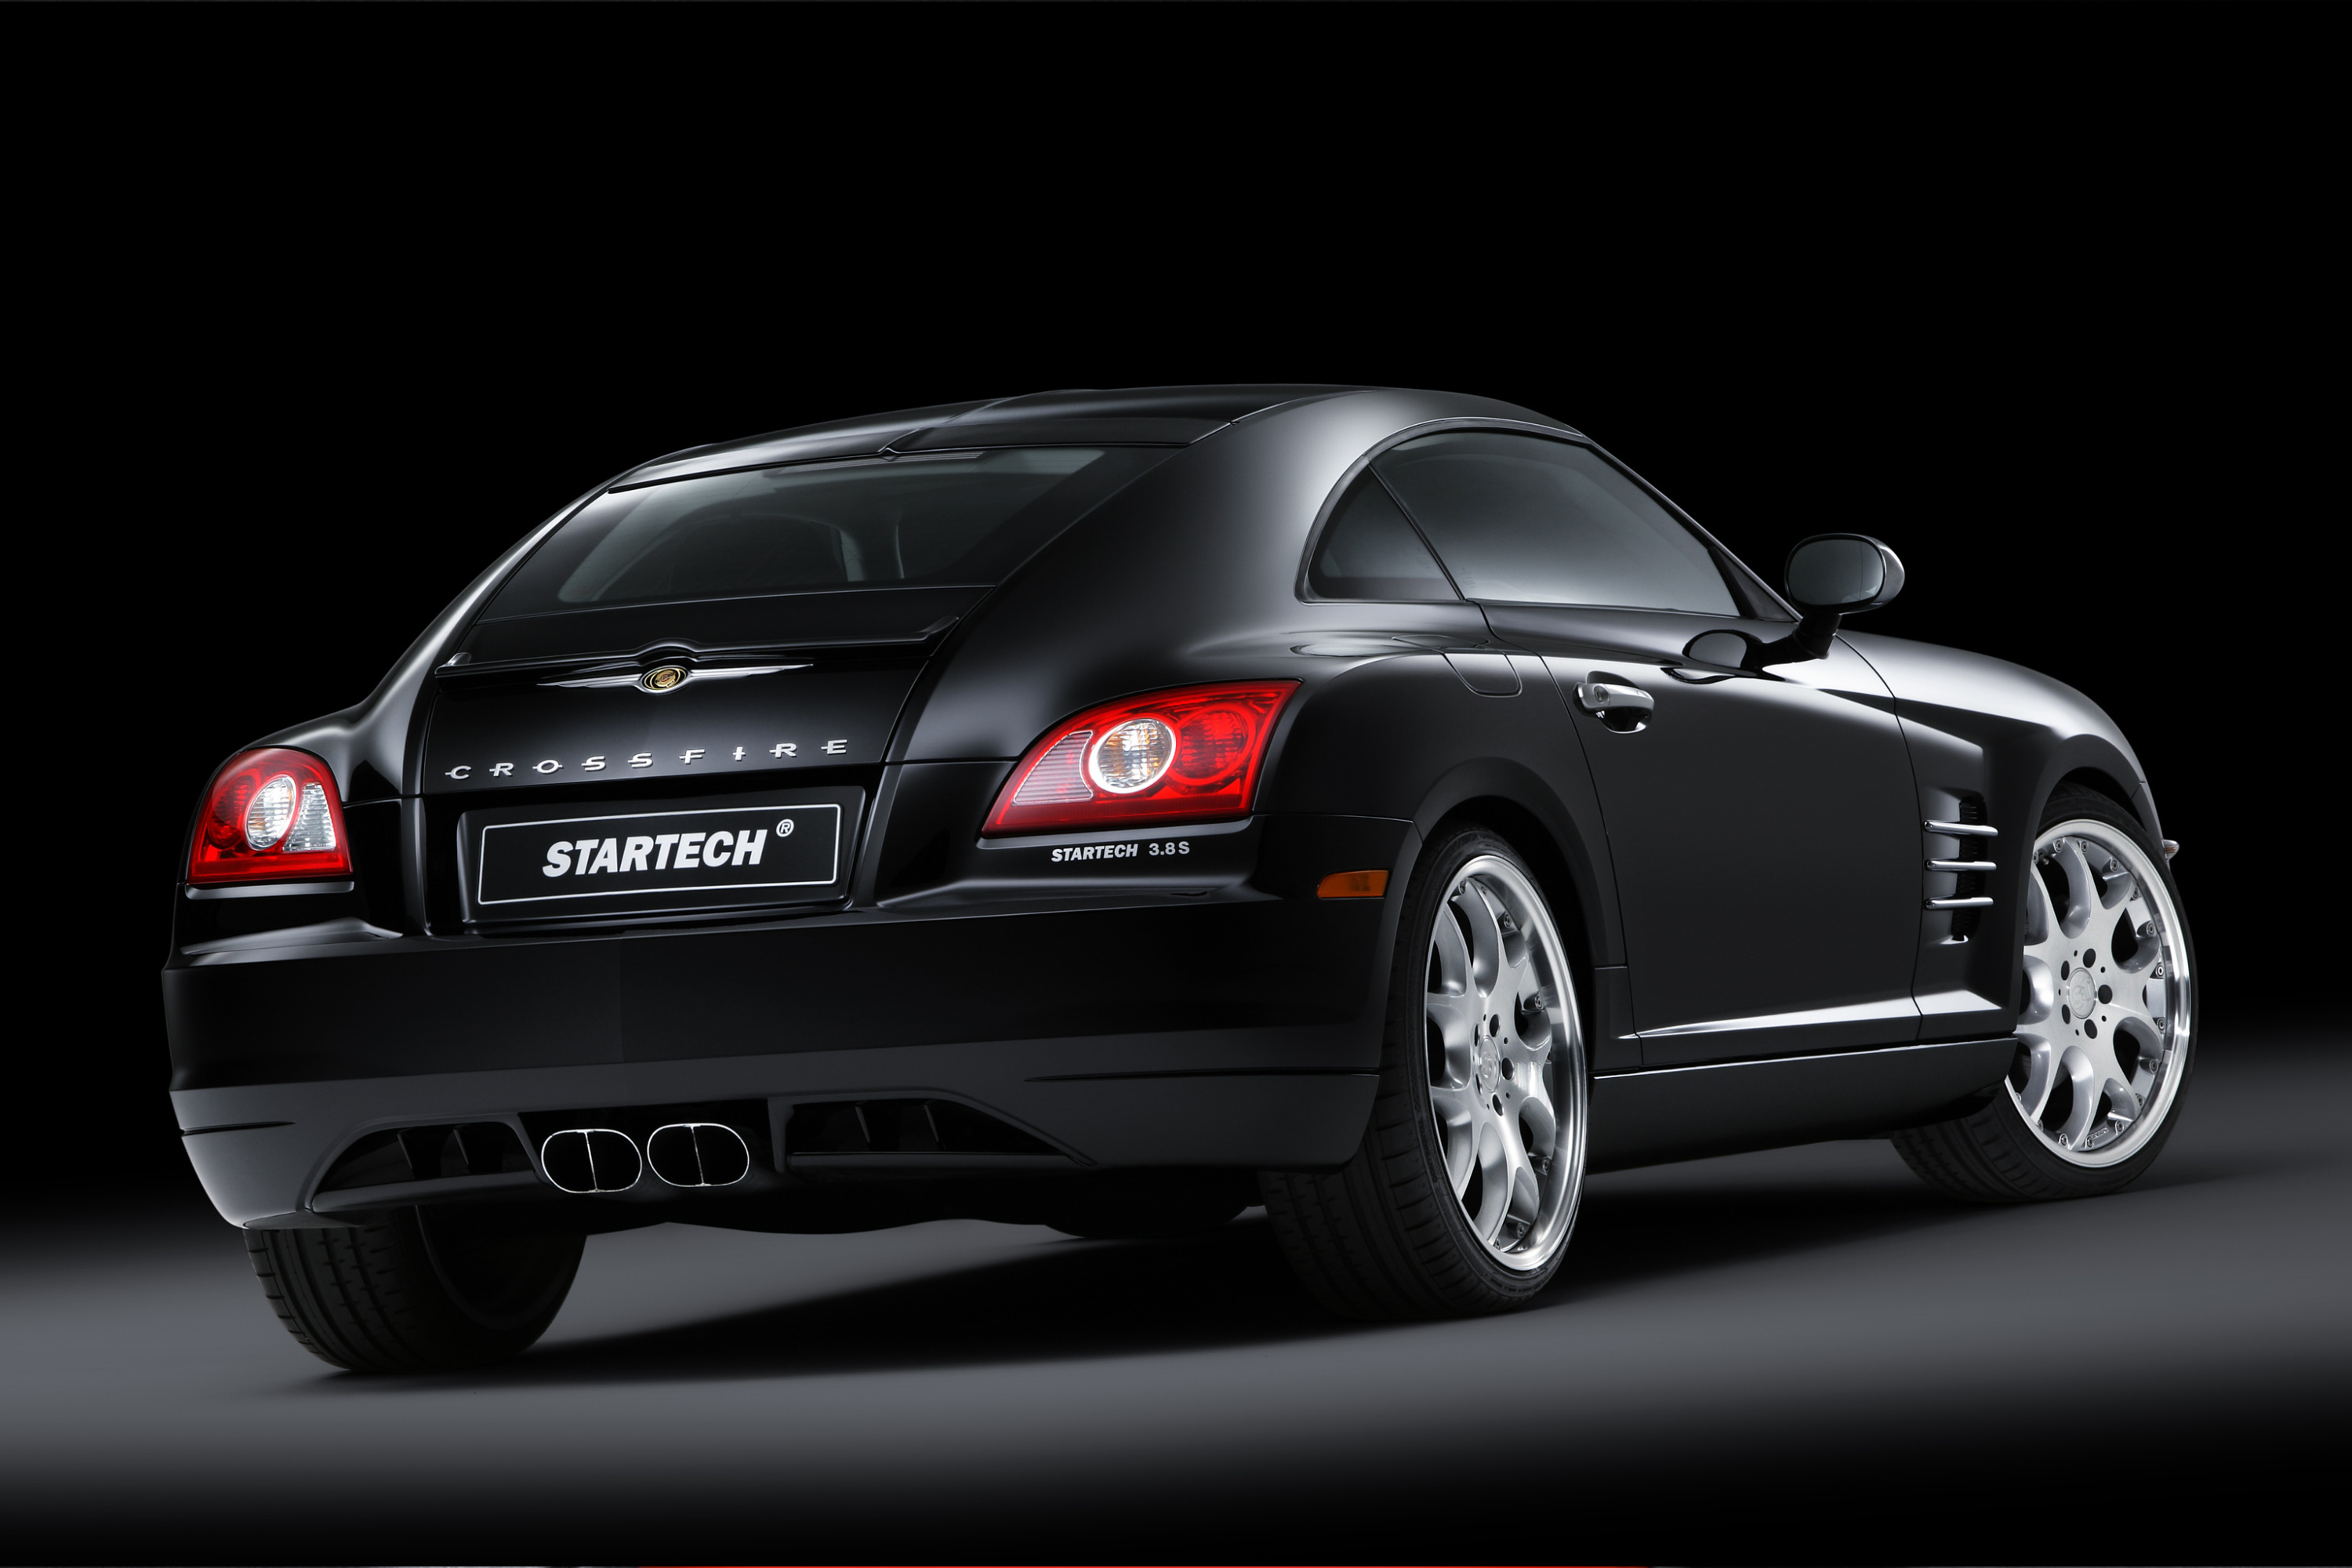 Chrysler crossfire review 2005